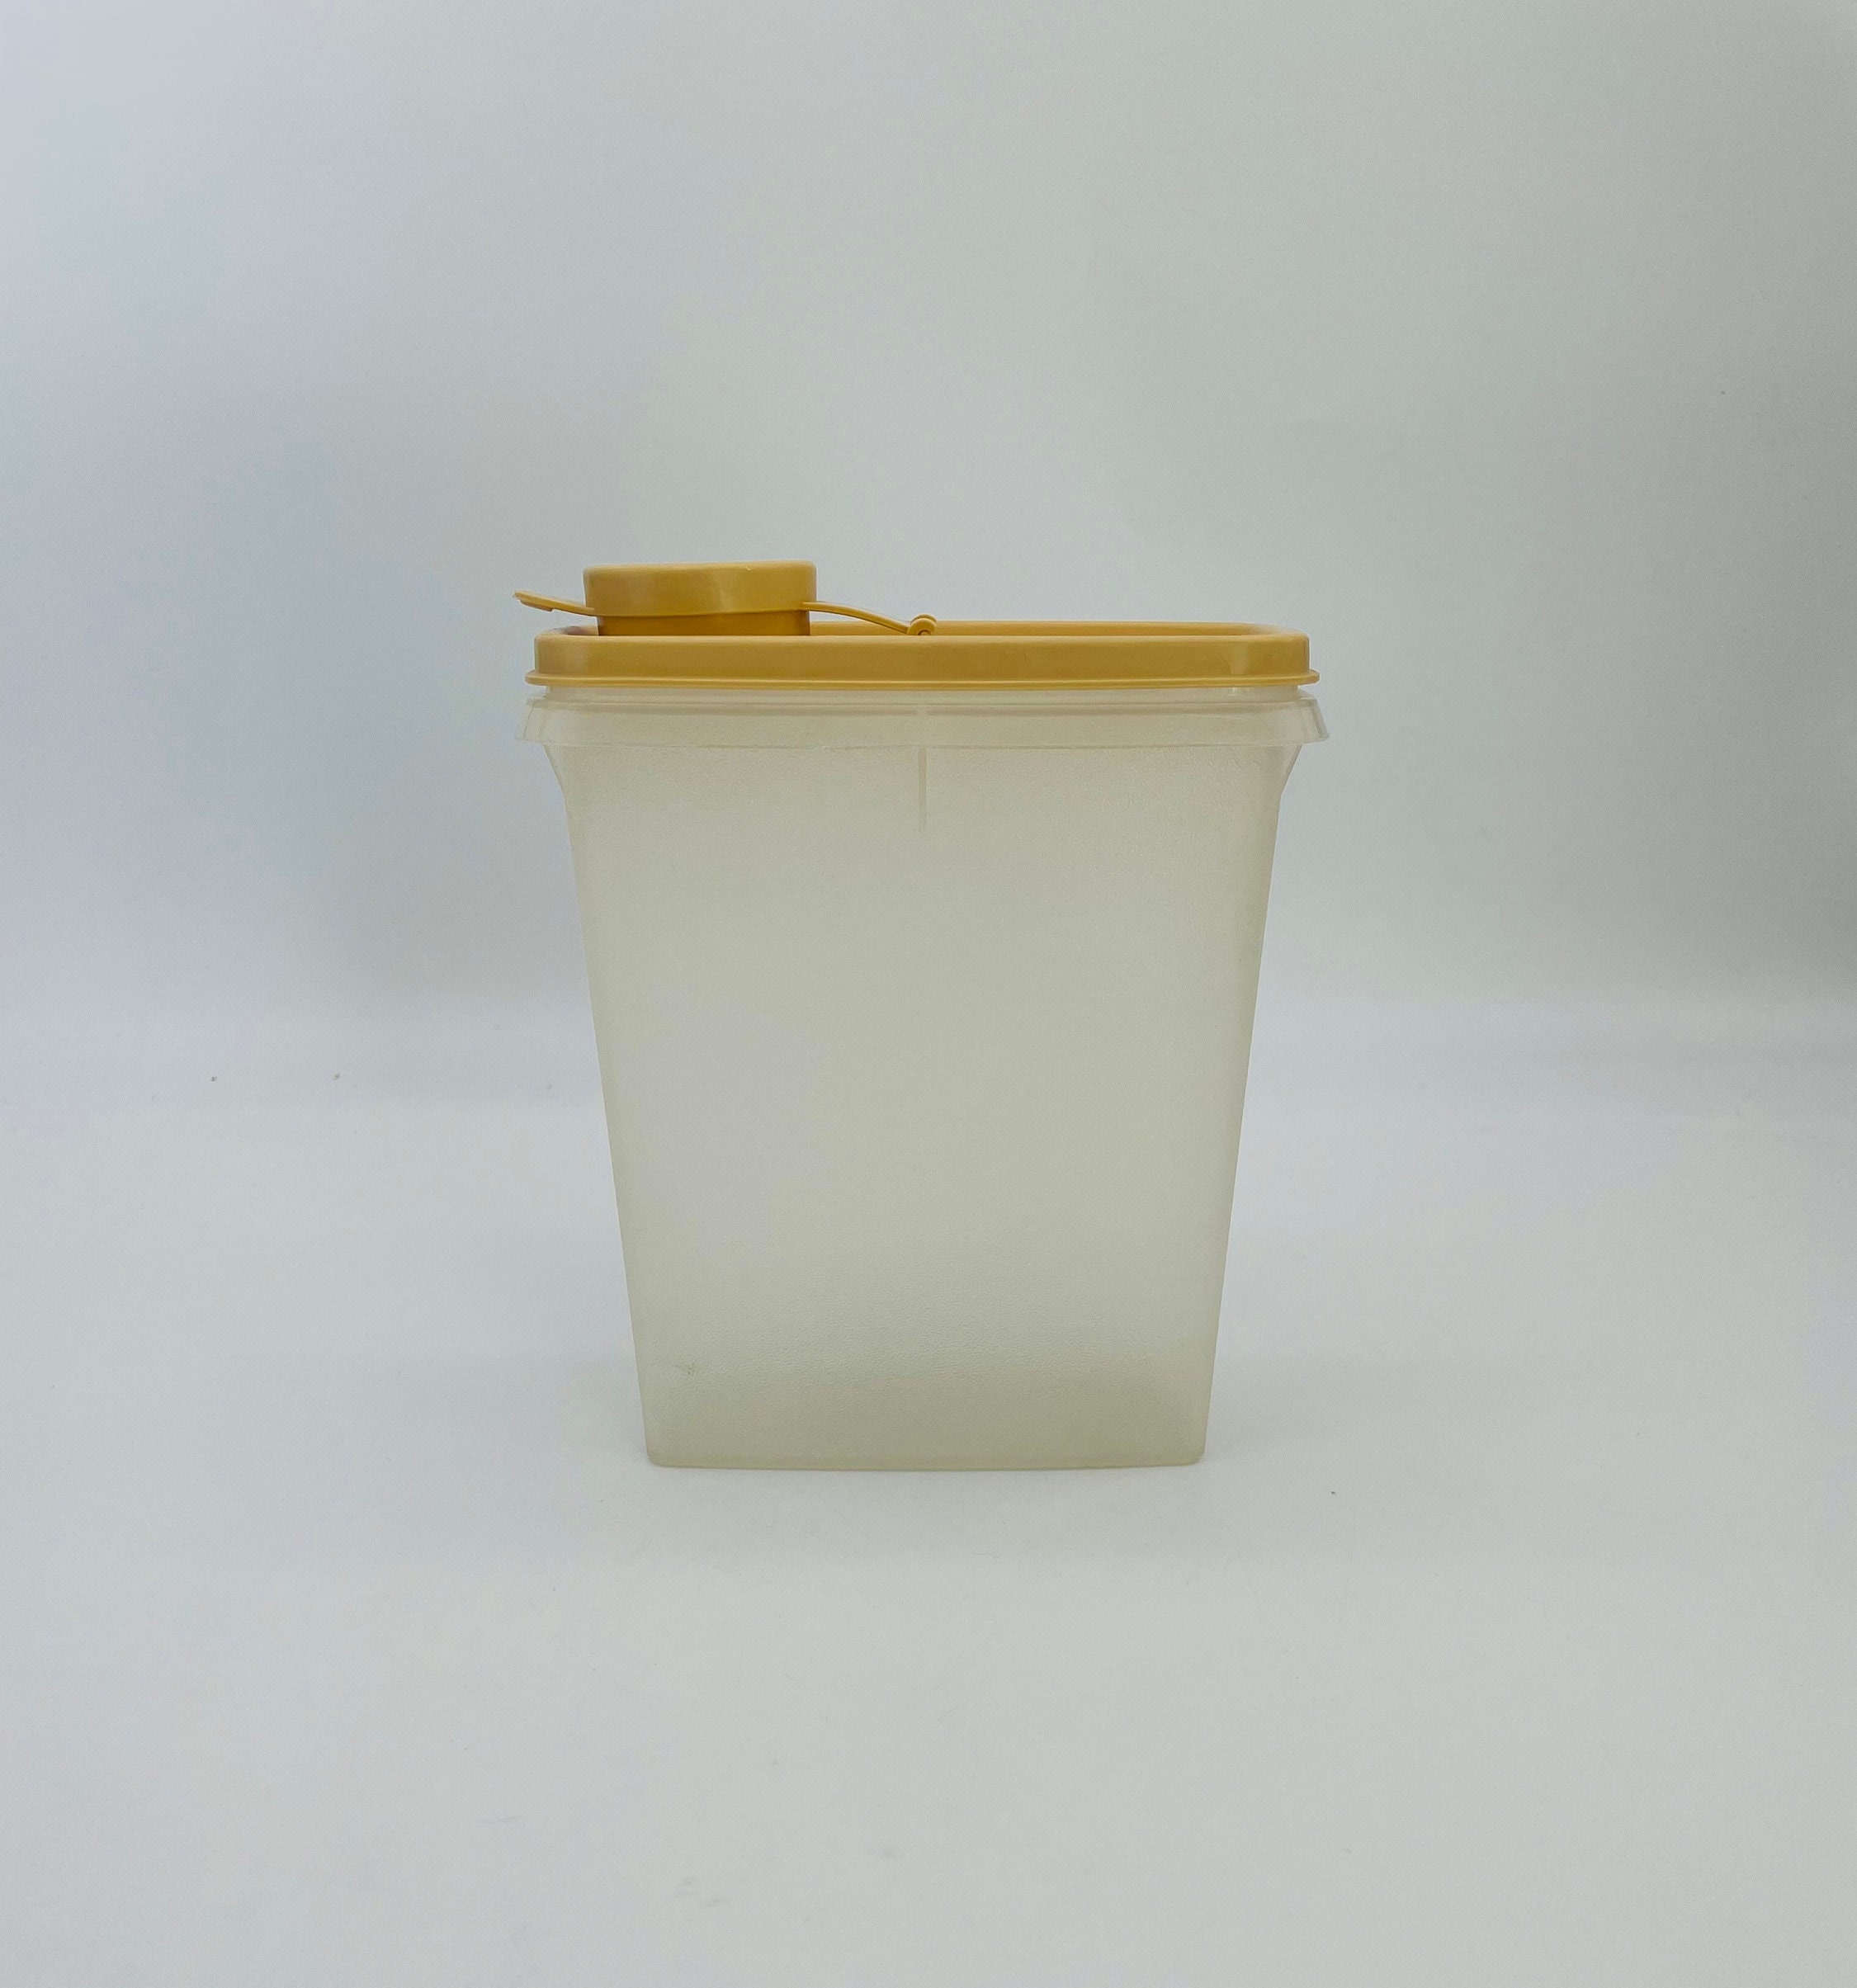 Vintage Tupperware Yellow Cereal Storage Container 